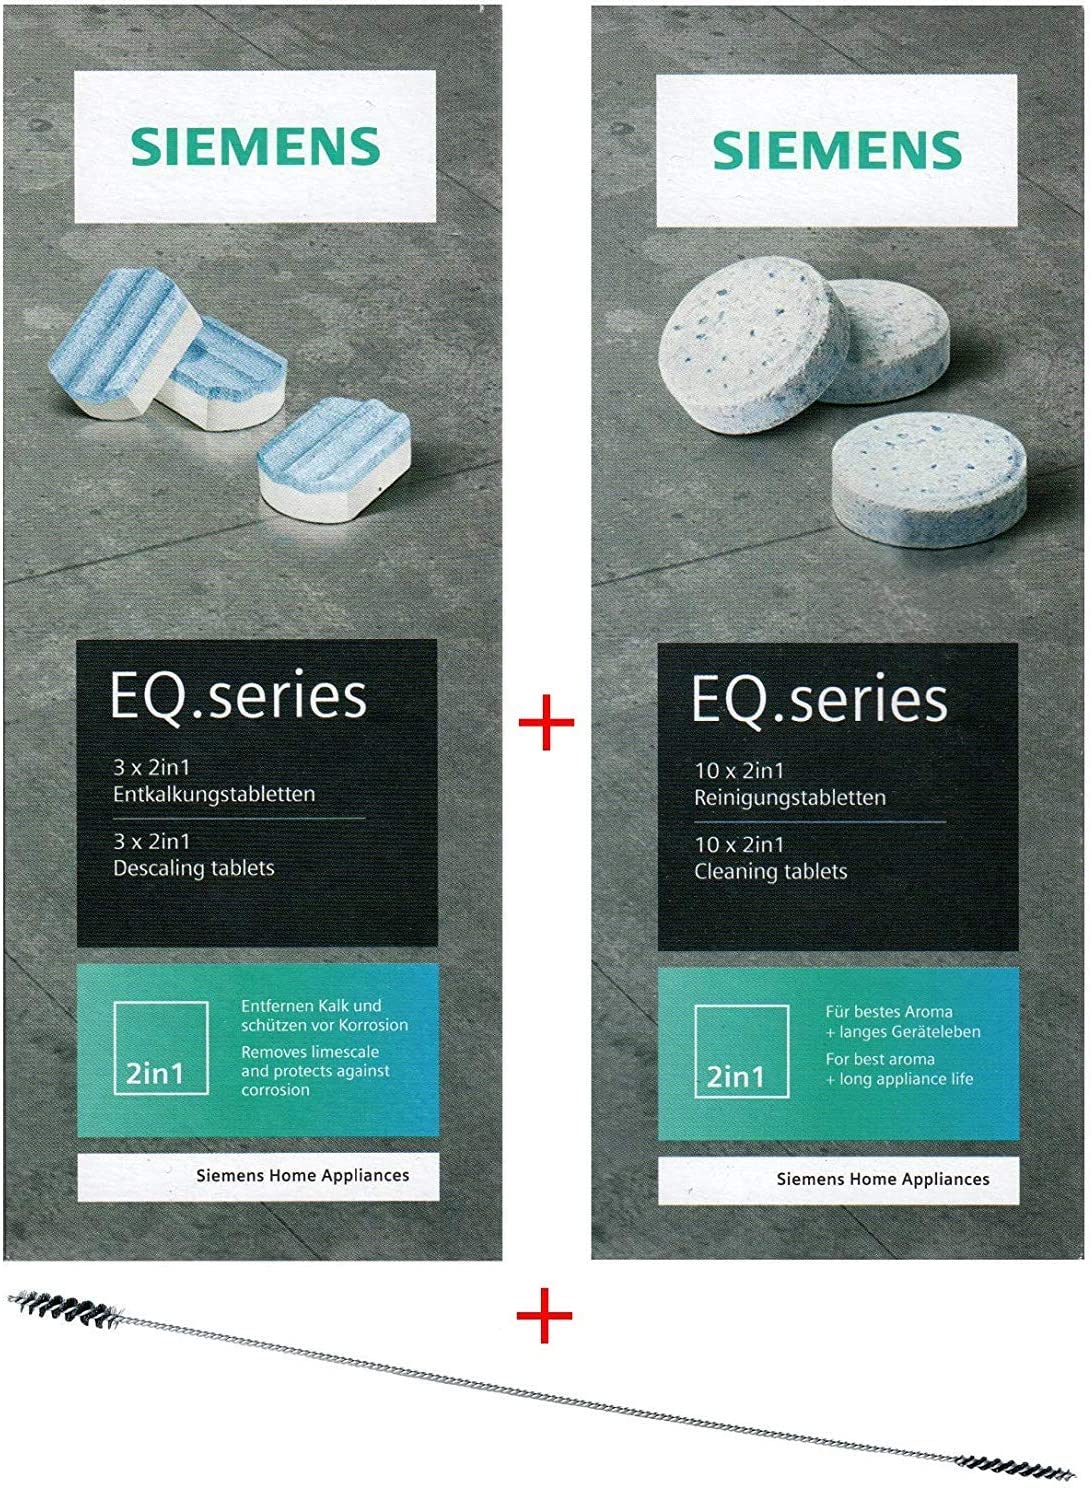 Siemens Cleaning set: 1 x descaling tablets 00311819 and 1 x cleaning tablets 00311769.